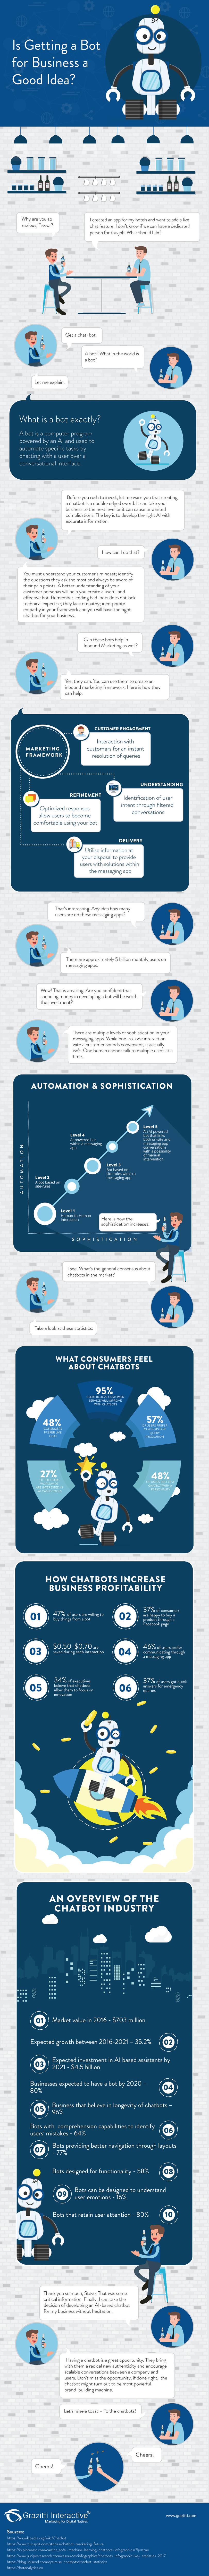 Are Chatbots a Good Idea for Your Business? [Infographic]